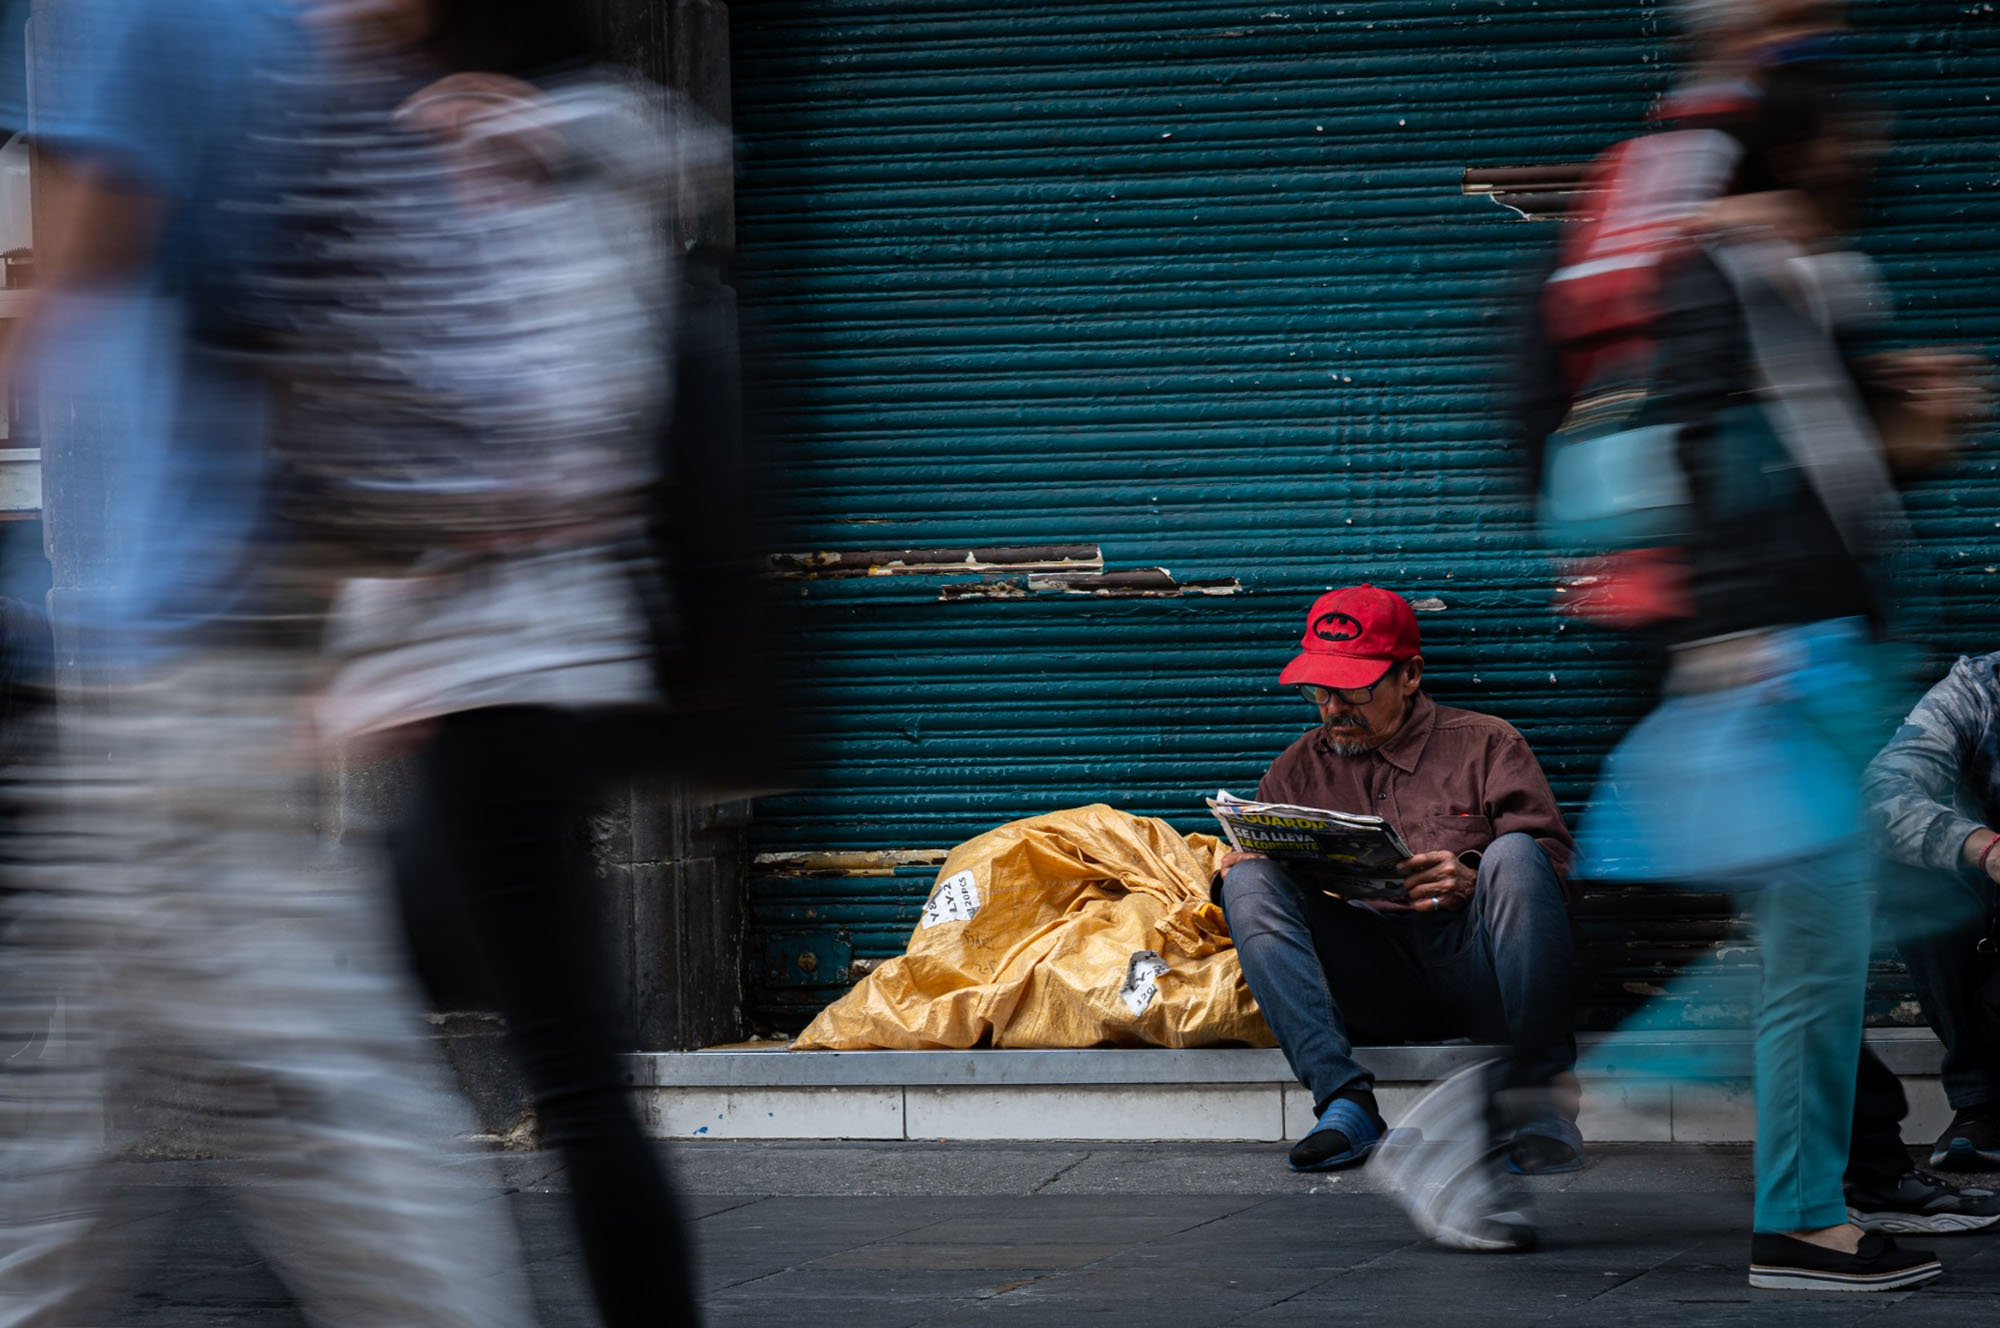 Photo: On a bustling shopping street in the tourist hotspot that is Centro Historico in CDMX, an elderly man wearing a red baseball cap sits by the sidewalk, reading a newspaper, seemingly unaffected by the blurry pedestrians walking by.